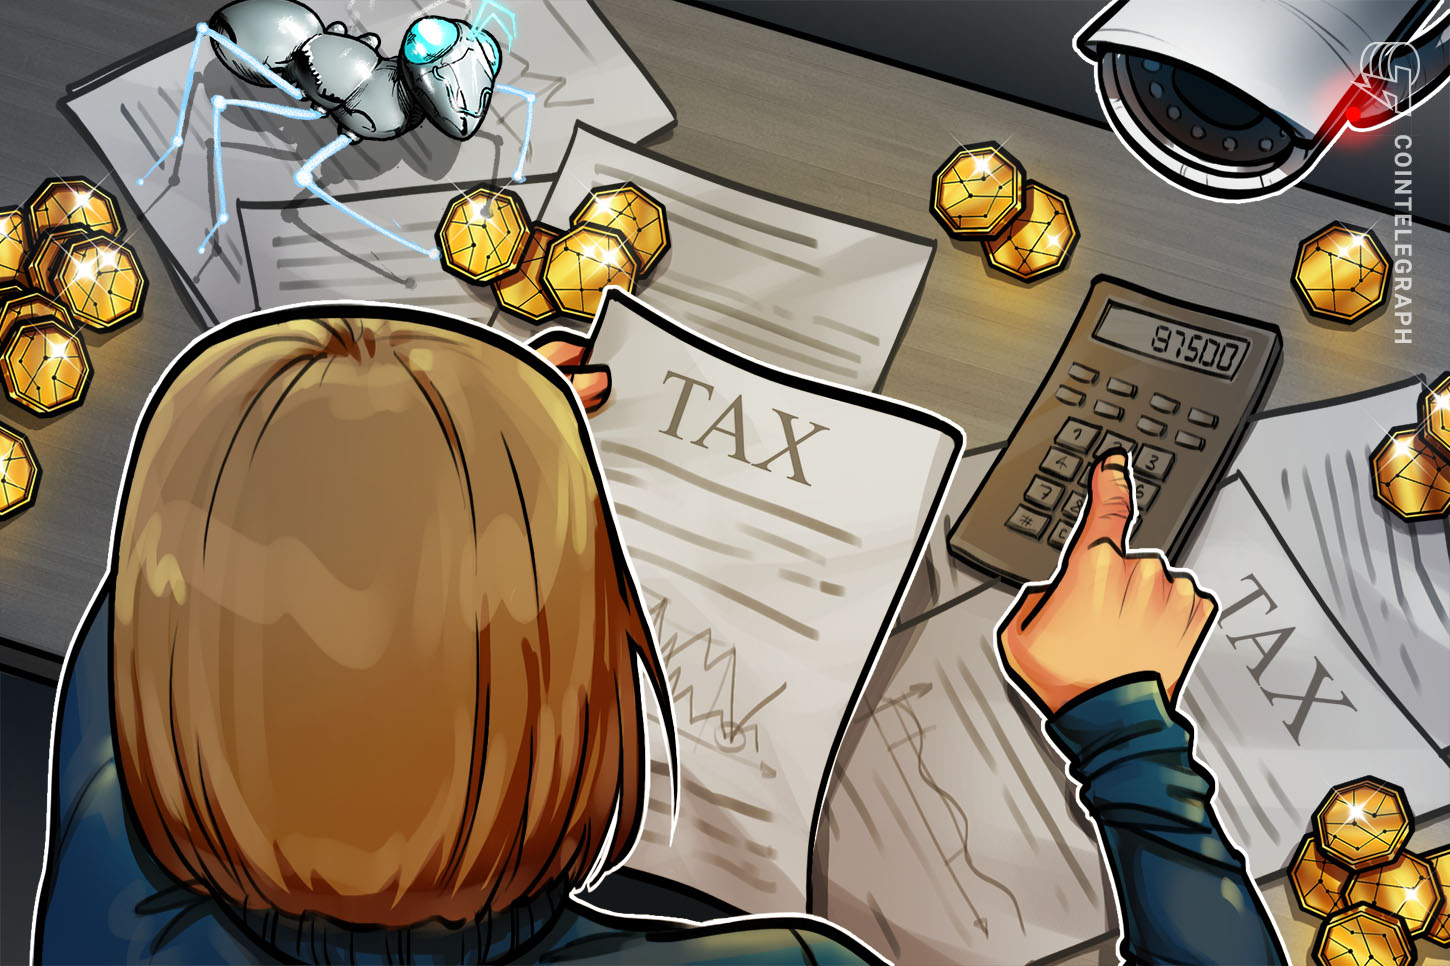 Thai tax collectors to streamline revenues with blockchain tech in 2021